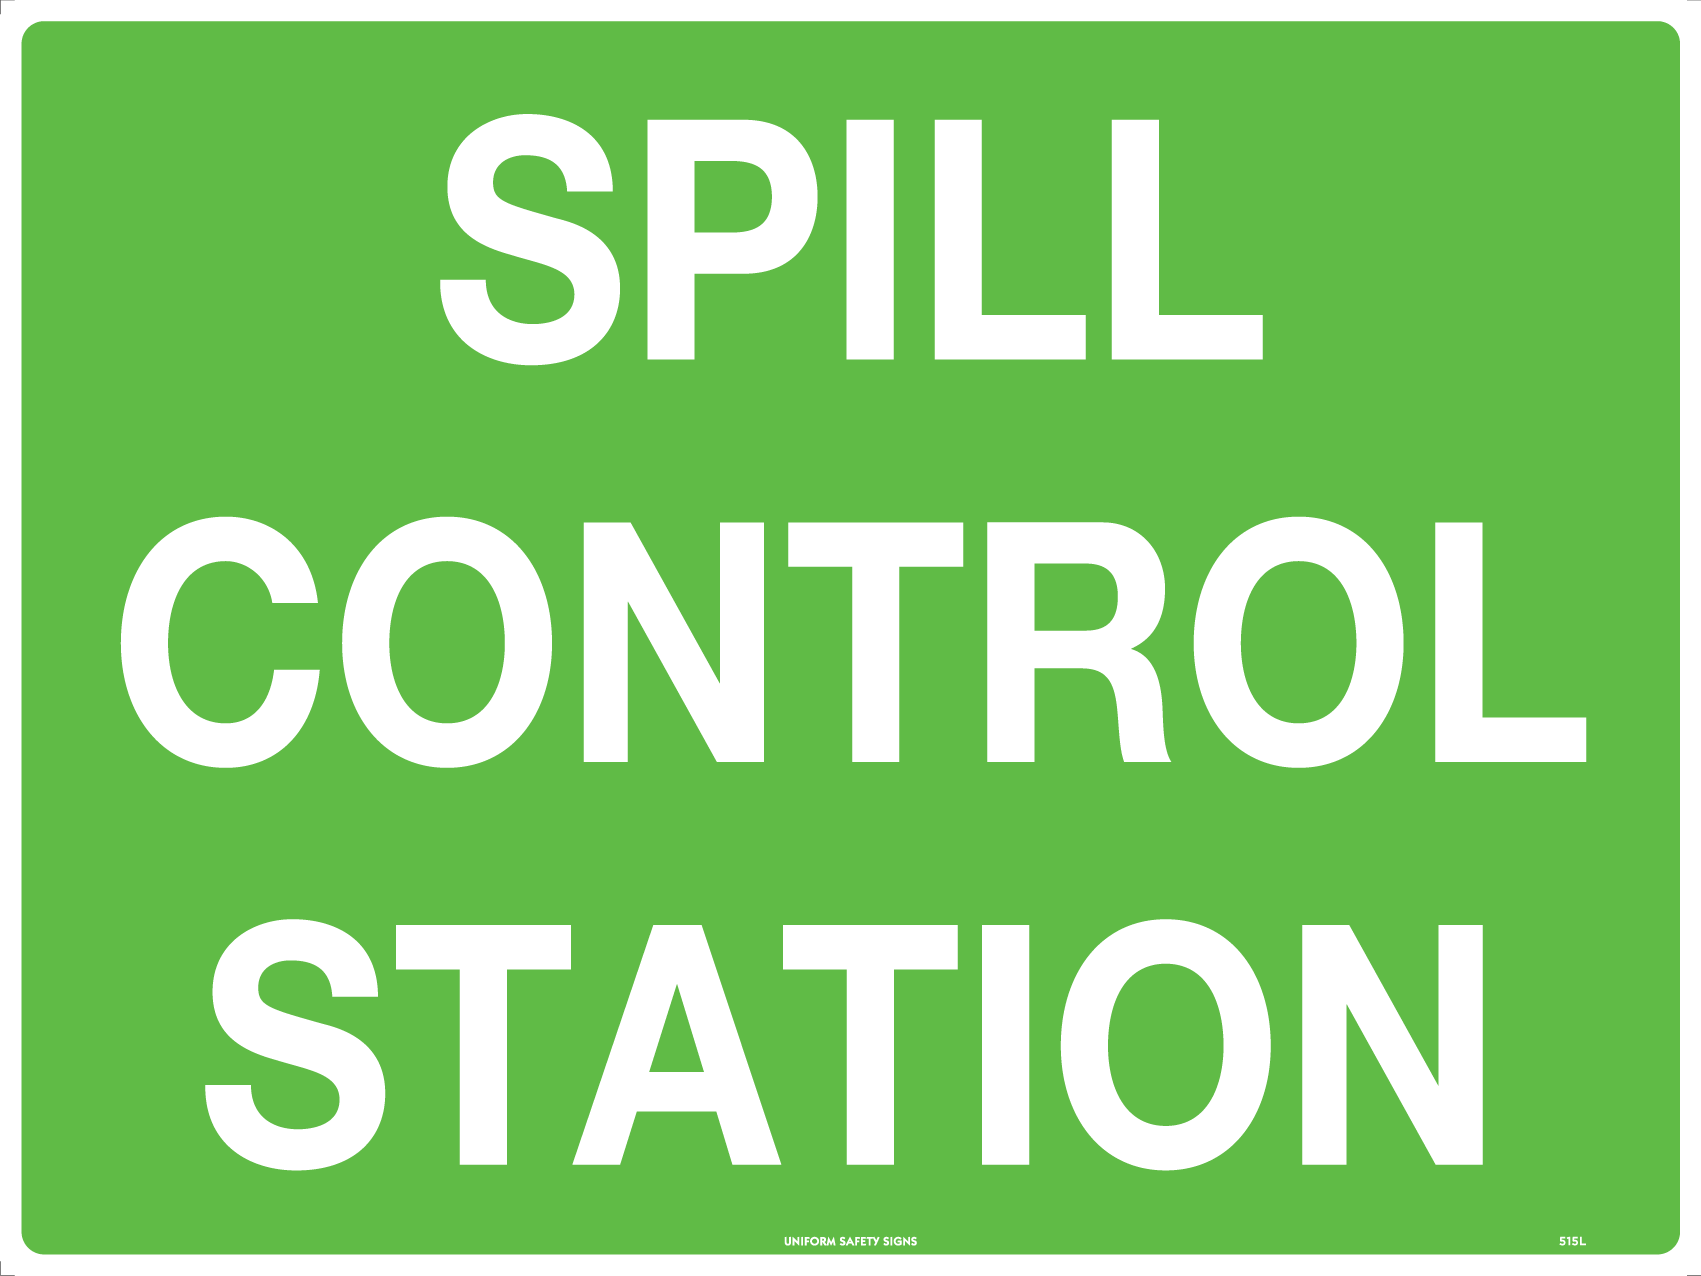 UNIFORM SAFETY 225X225MM POLY OFF WALL SPILL CONTROL STATION 